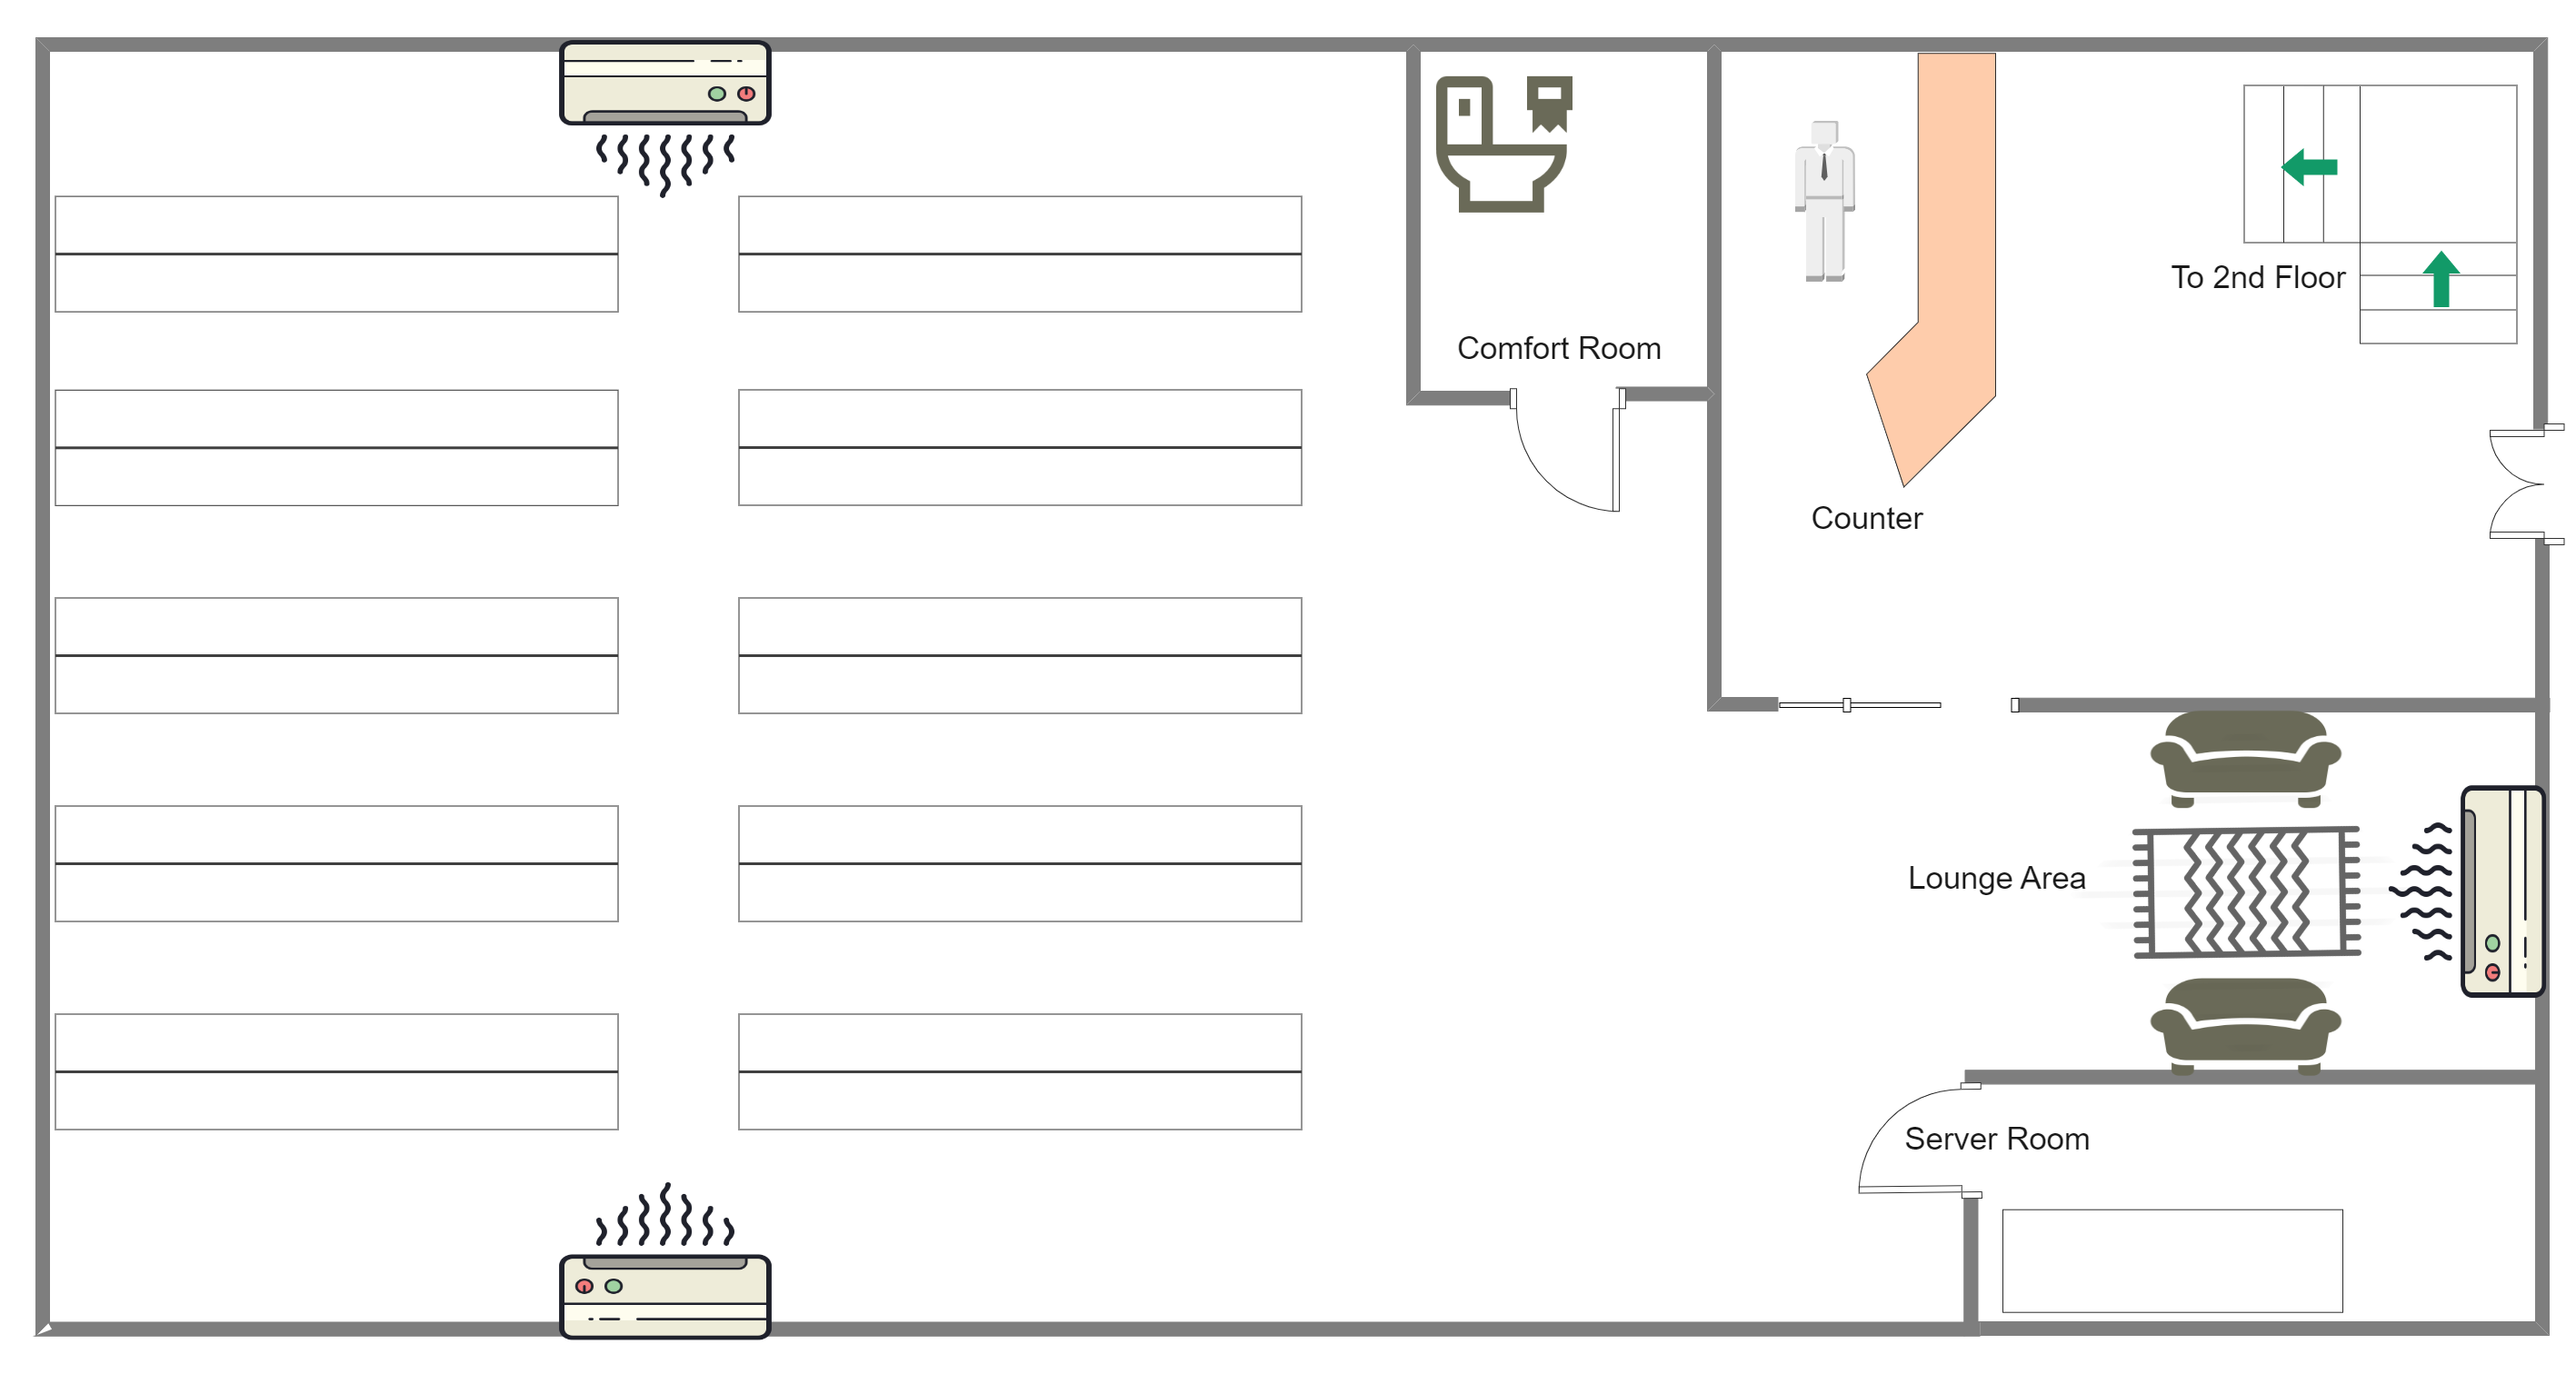 First Floor Plan for Computer Networking Shop